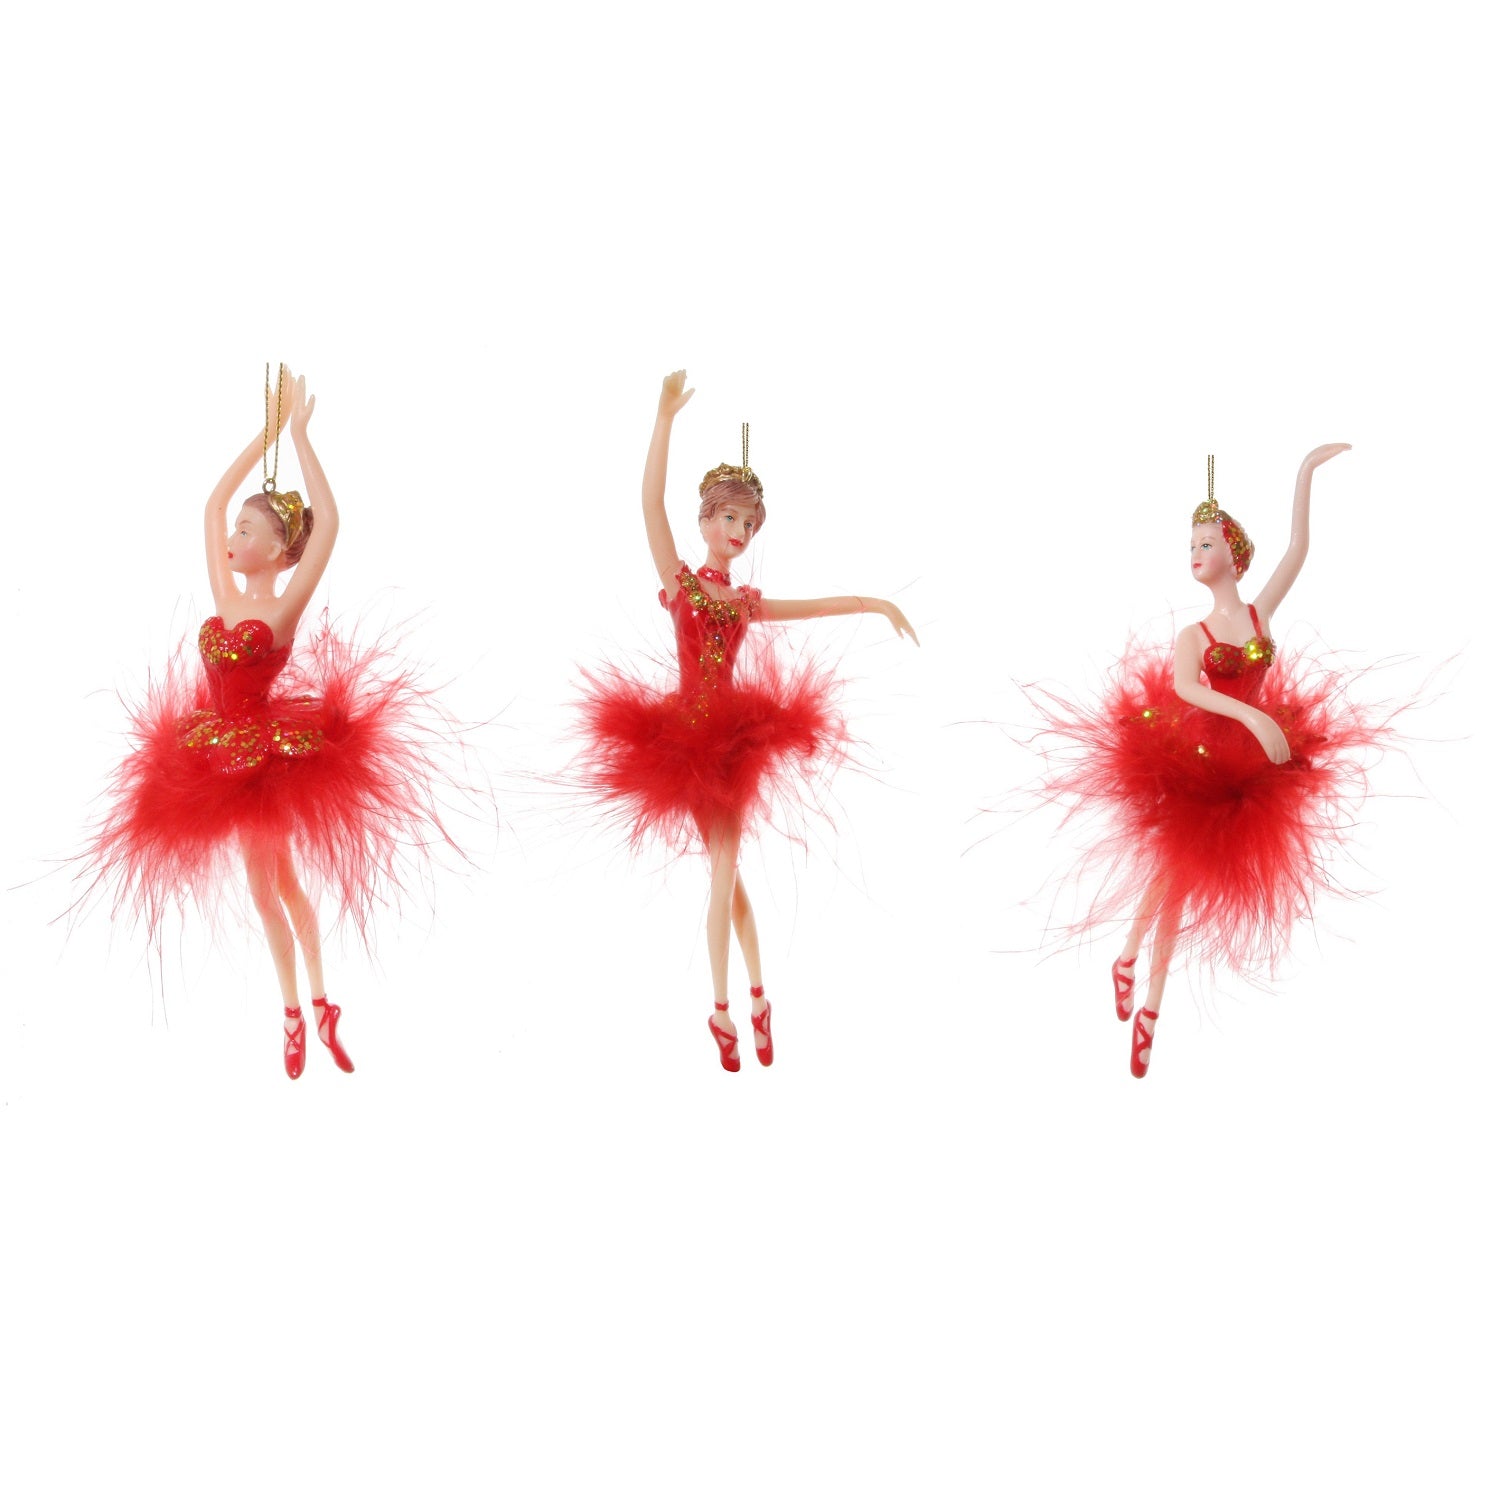 Ballerina Red Feather Tutu Christmas Hanging Ornament - Cou-De-Pied  Browse our beautiful range of luxury festive Christmas tree decorations, baubles & ornaments for your tree this christmas.